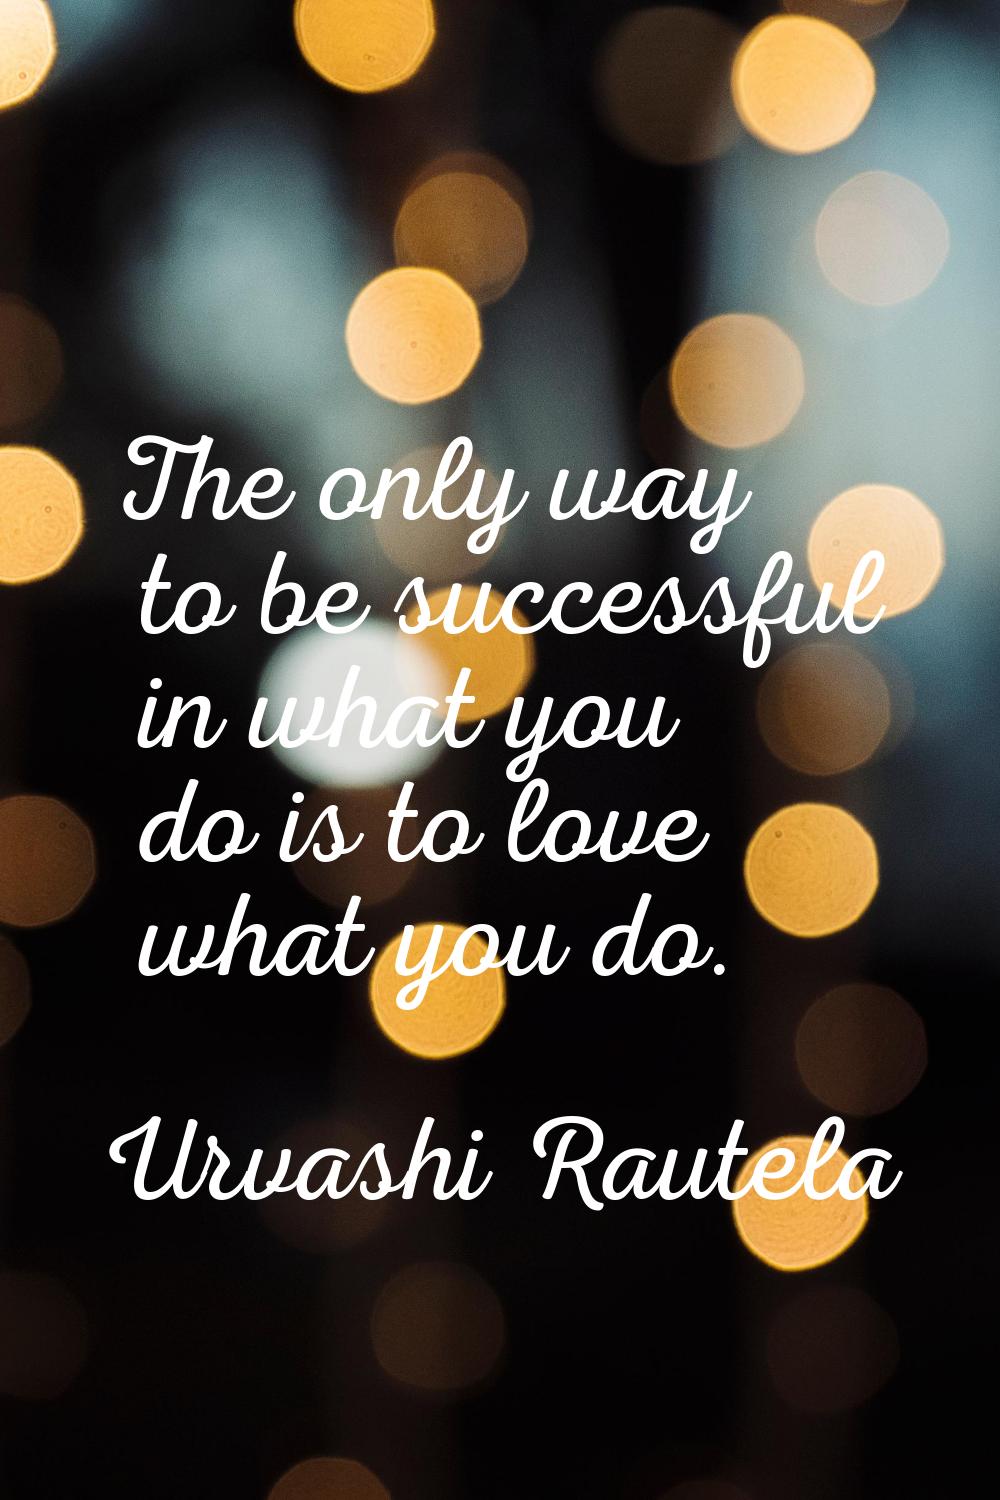 The only way to be successful in what you do is to love what you do.